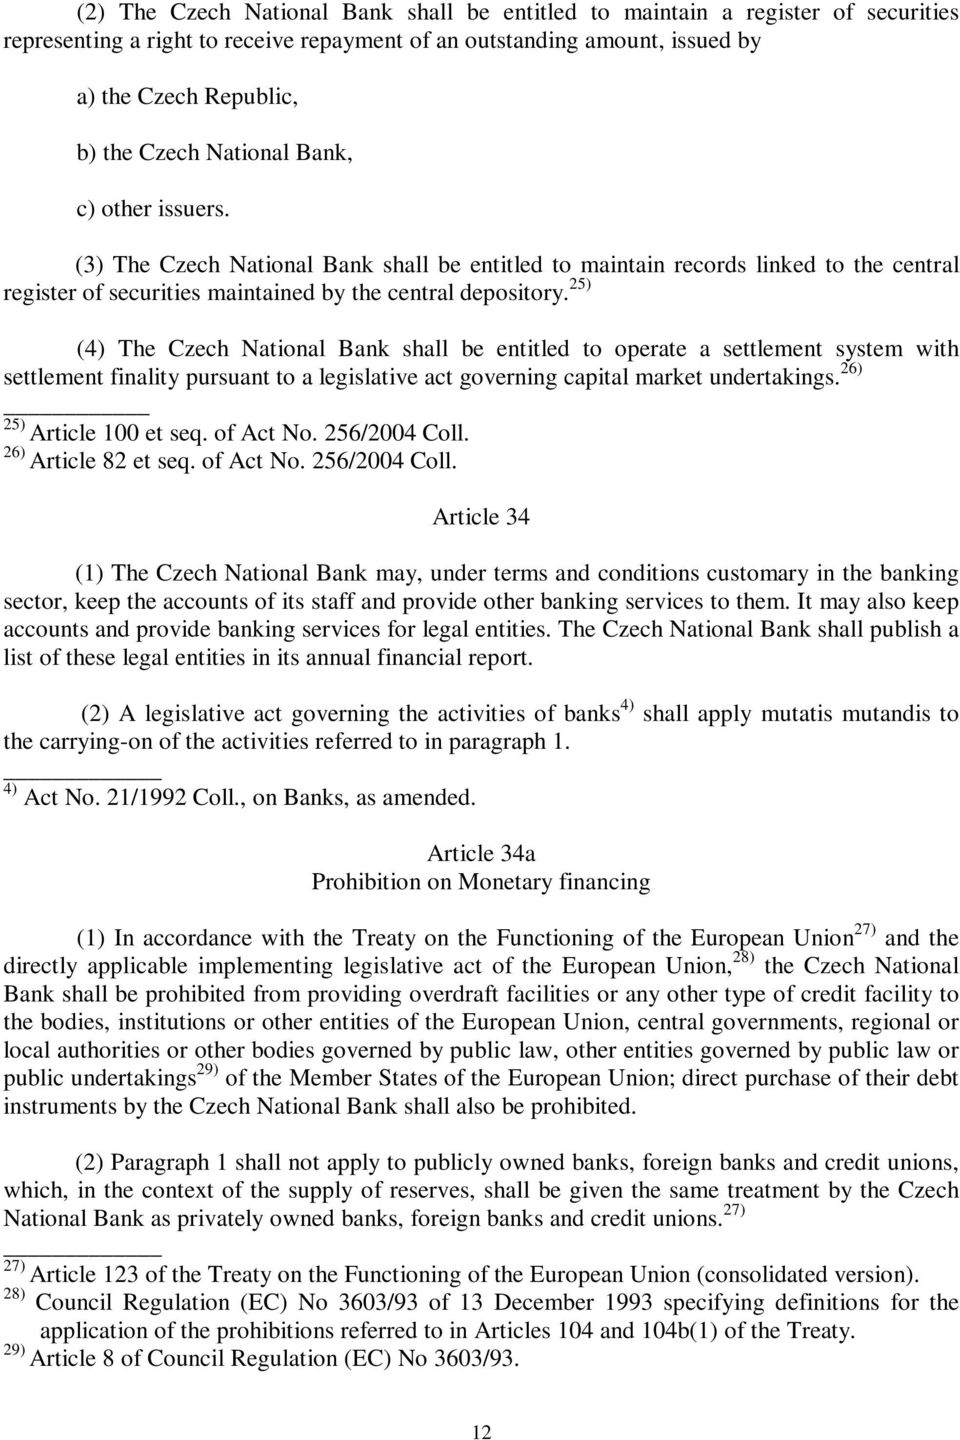 25) (4) The Czech National Bank shall be entitled to operate a settlement system with settlement finality pursuant to a legislative act governing capital market undertakings.